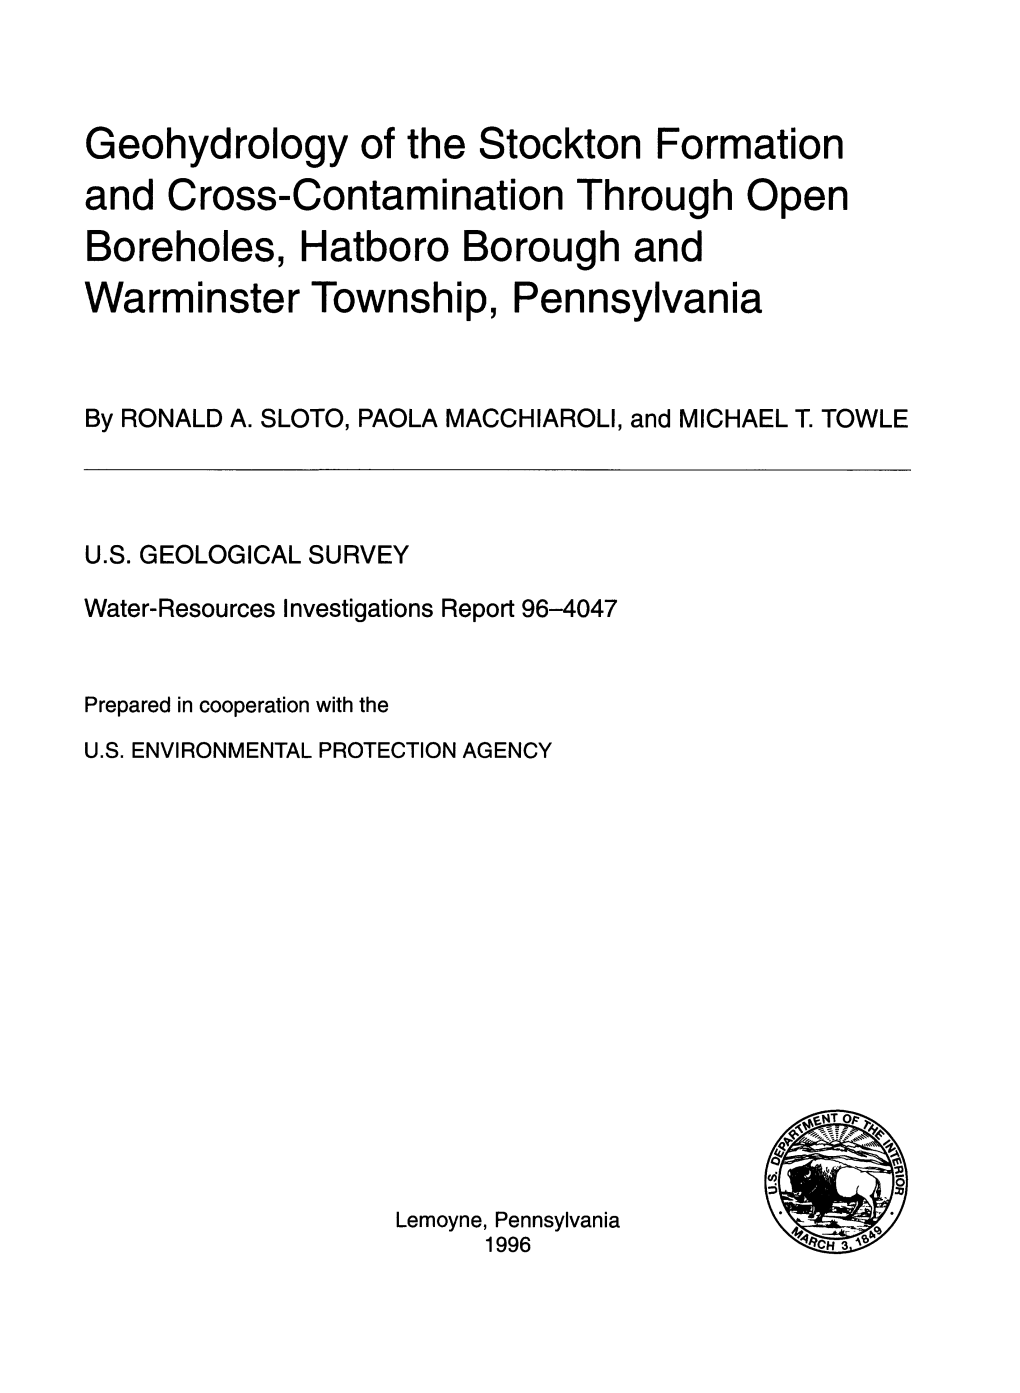 Geohydrology of the Stockton Formation and Cross-Contamination Through Open Boreholes, Hatboro Borough and Warminster Township, Pennsylvania